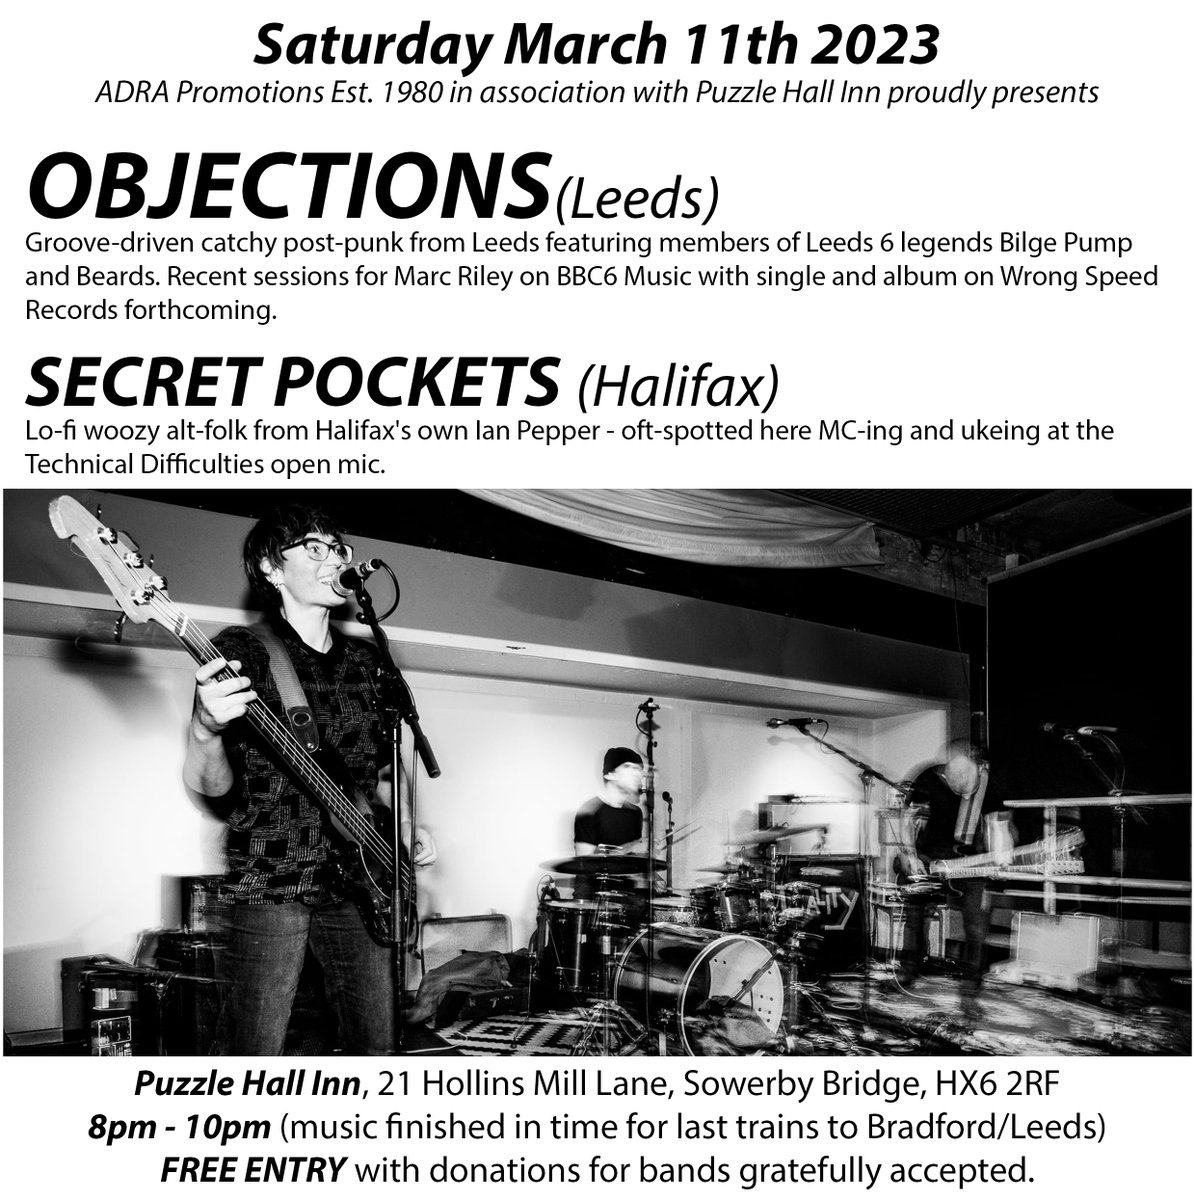 Uberchuffed to be bringing @ObjectionsBand to the lovely @puzzlehallinn in Sowerby Bridge Saturday 11th March. Free Entry and finishes in time for trains back to Leeds/Bradford for those travelling in that direction.